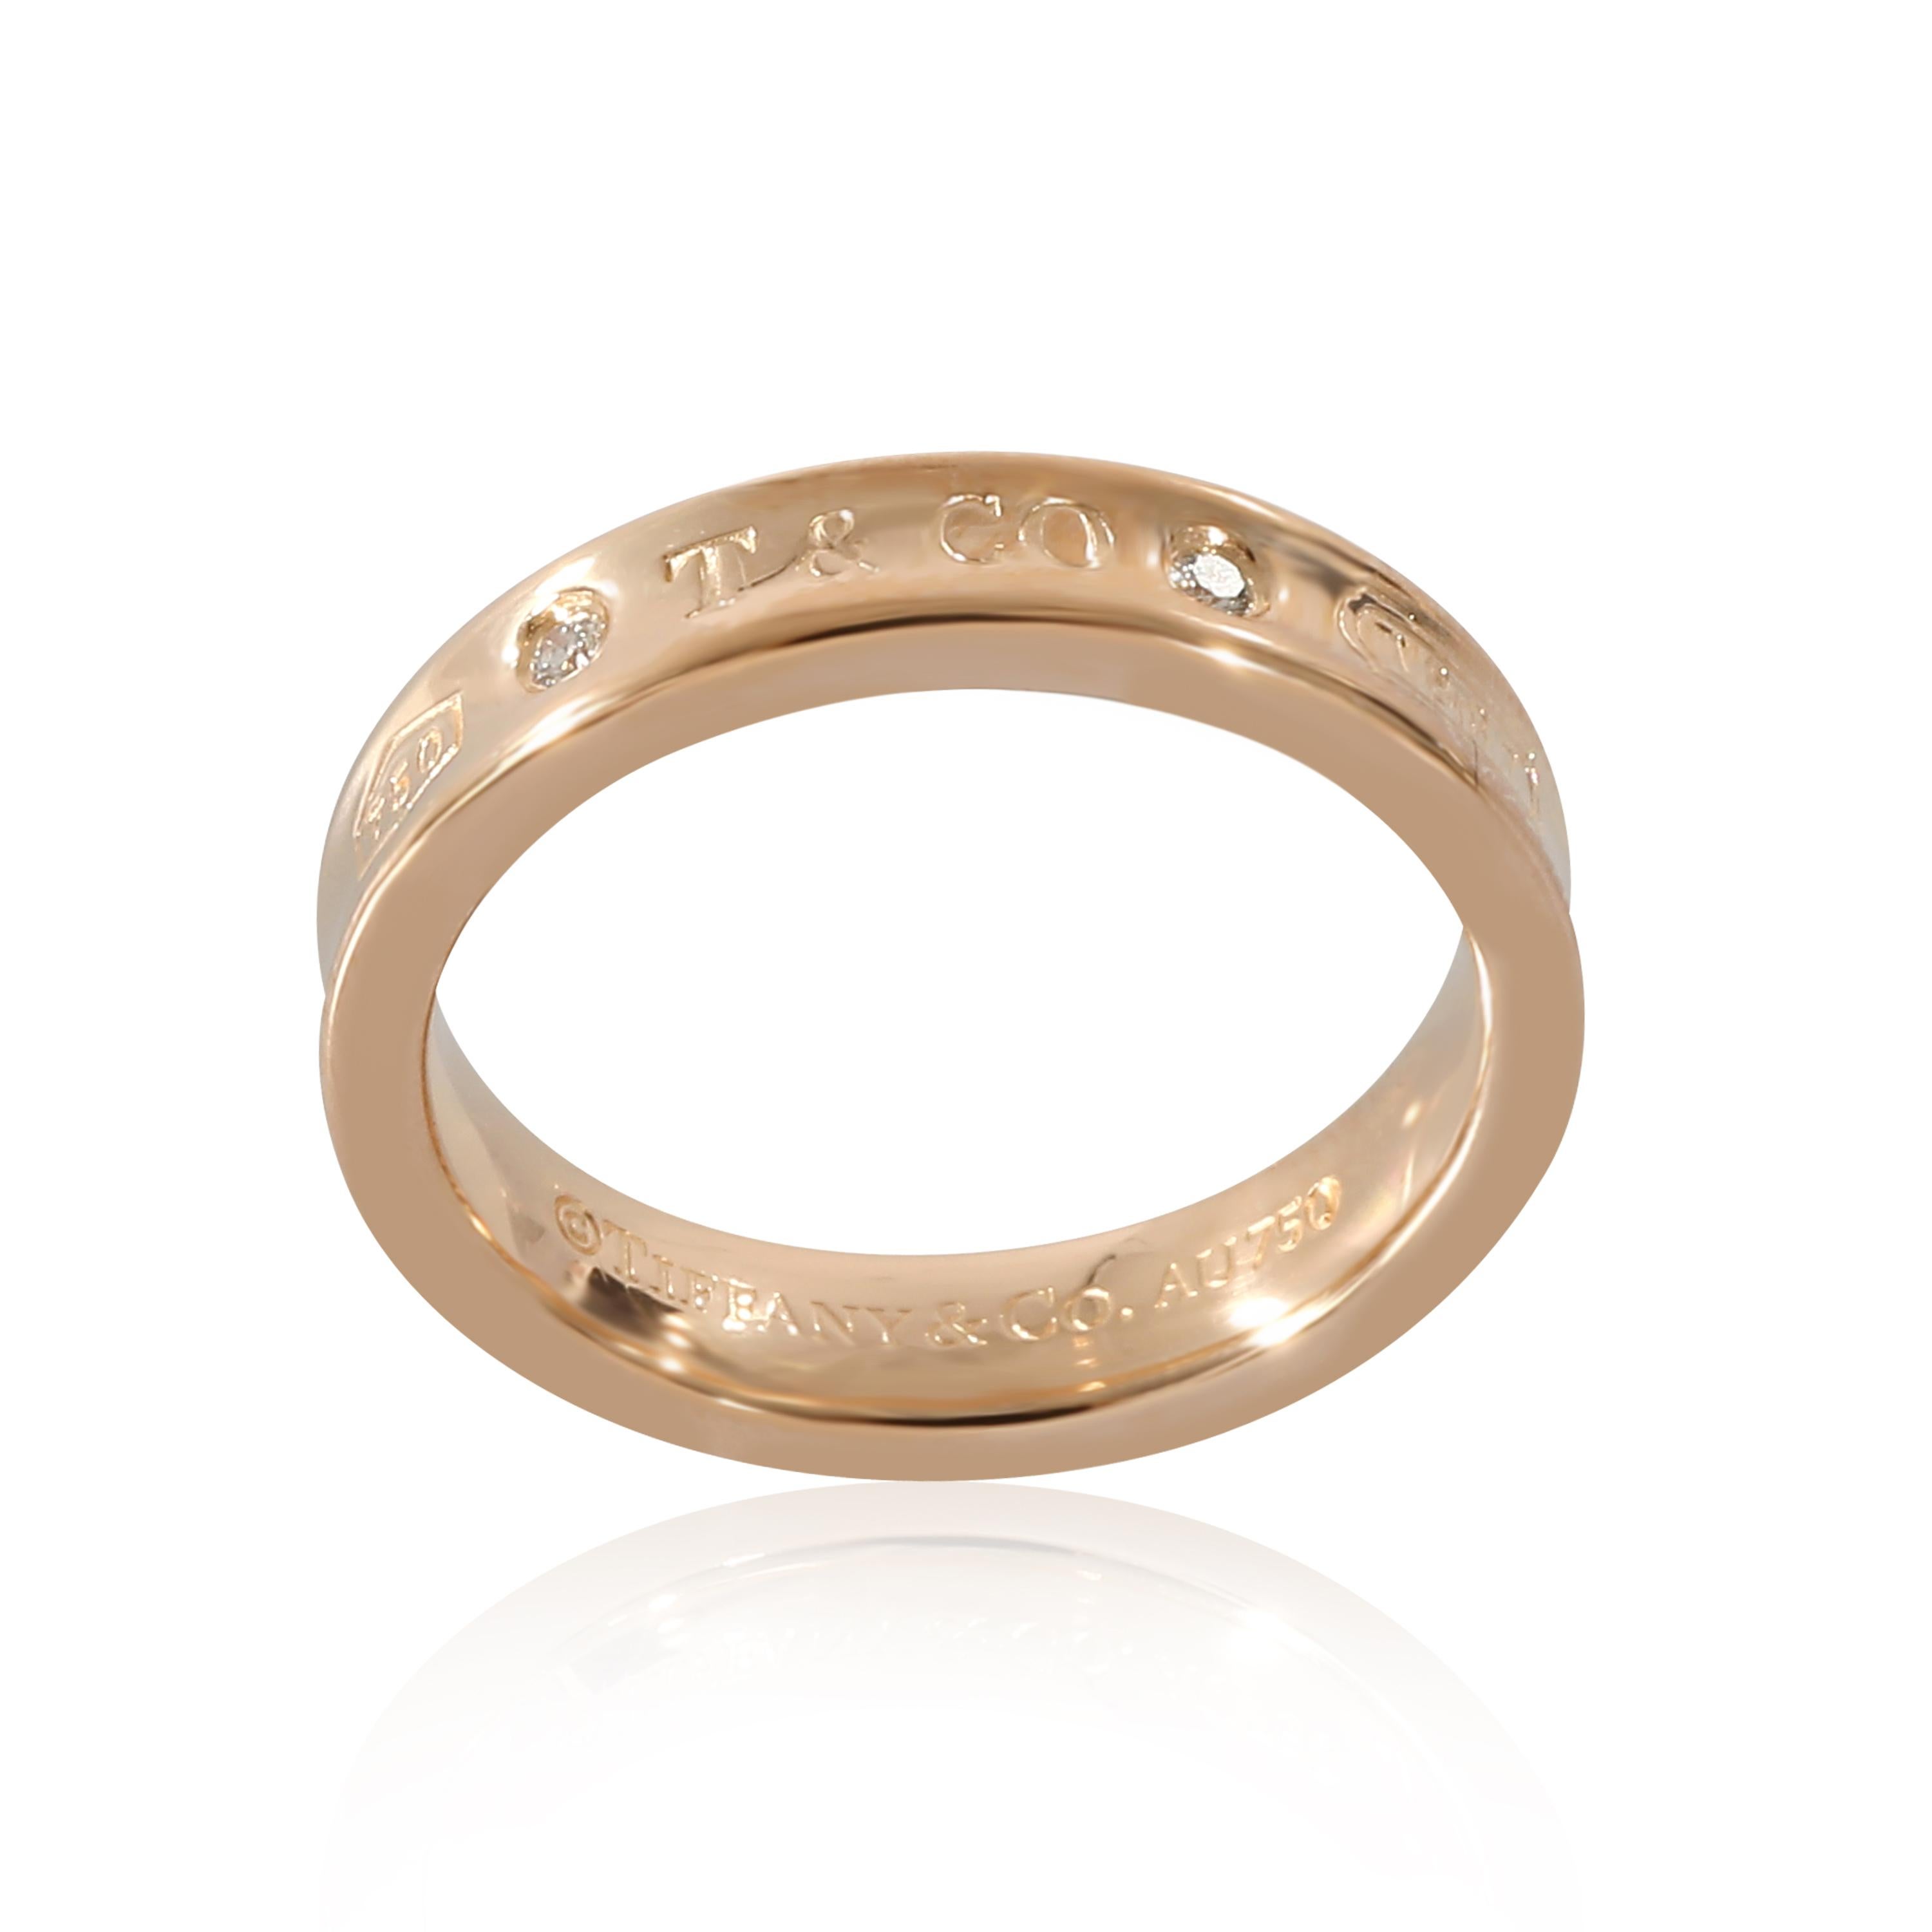 Tiffany & Co. 1837 Narrow Diamond Ring in 18K Rose Gold 0.02 CTW

PRIMARY DETAILS
SKU: 134997
Listing Title: Tiffany & Co. 1837 Narrow Diamond Ring in 18K Rose Gold 0.02 CTW
Condition Description: A quick lesson in style and history. The Tiffany &